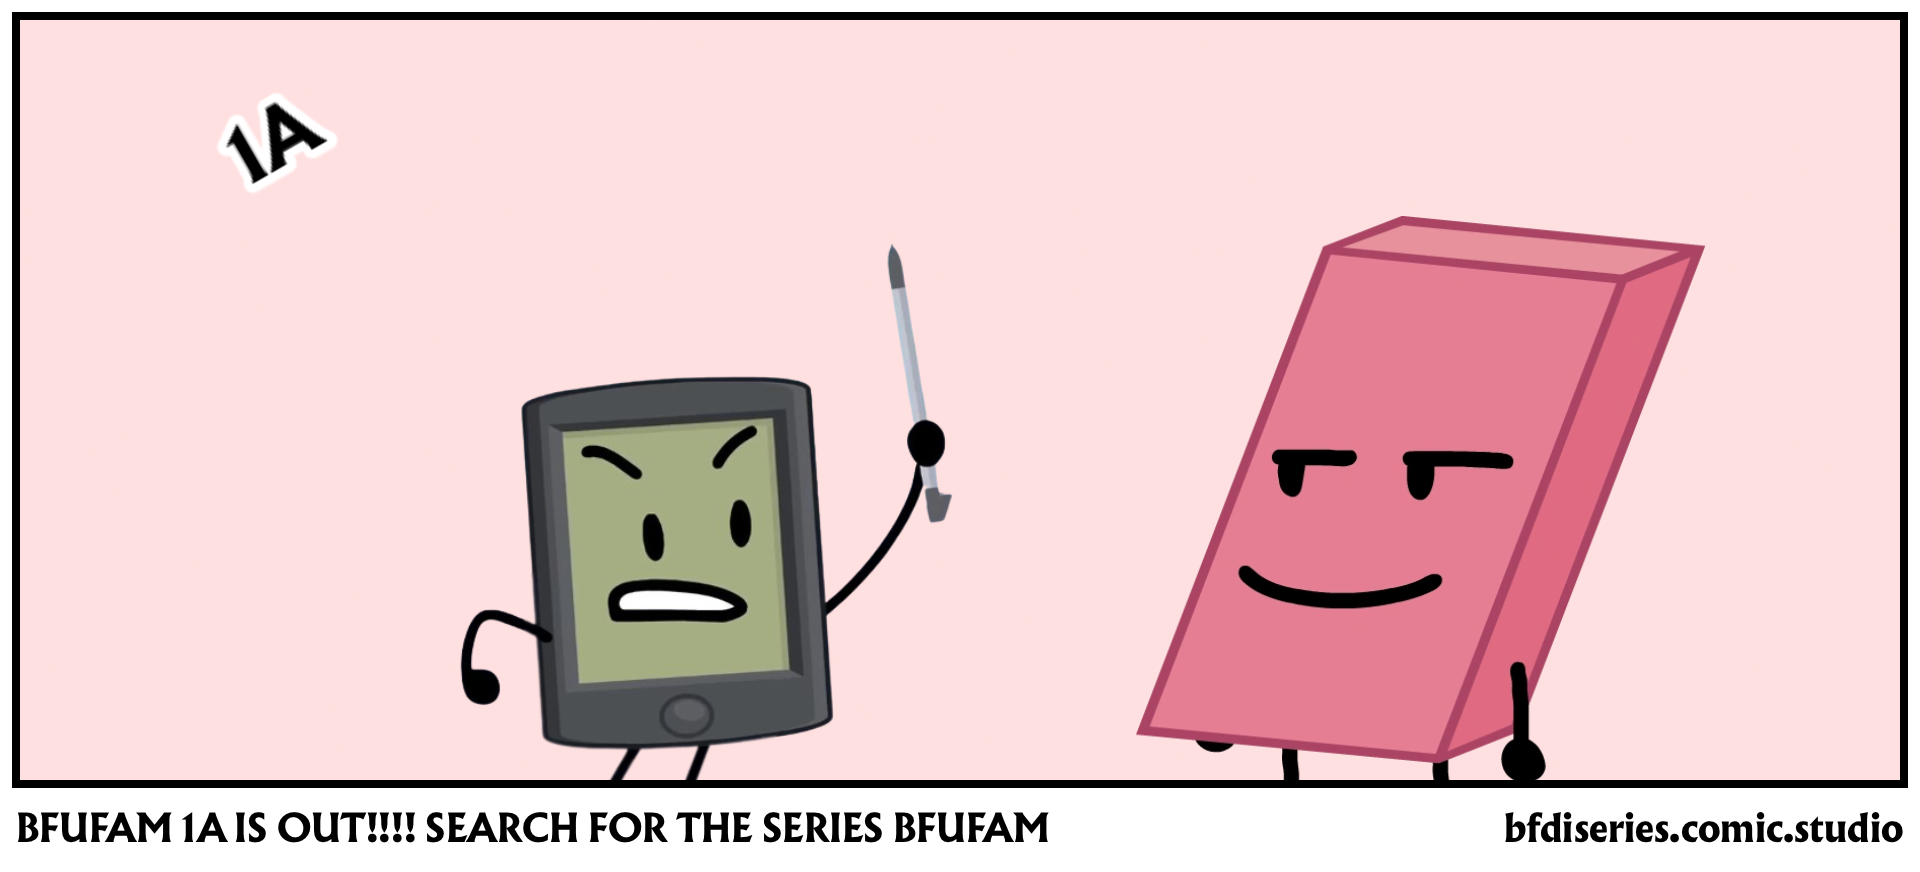 BFUFAM 1A IS OUT!!!! SEARCH FOR THE SERIES BFUFAM